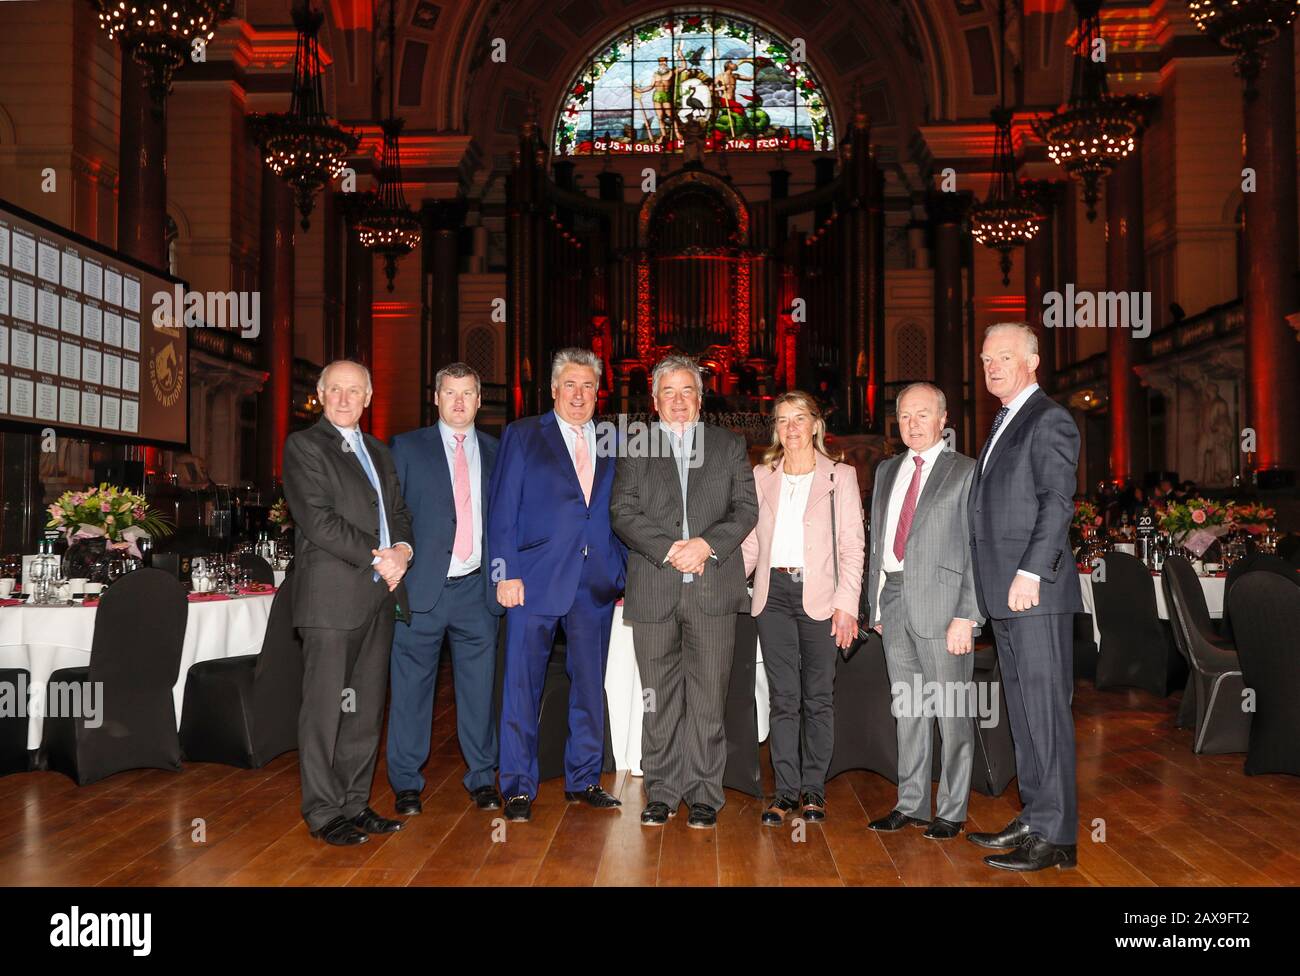 Trainers (from left to right) Oliver Sherwood, Gordon Elliott, Paul Nicholls, Nigel Twiston-Davies, Sue Smith, Jonjo O'Neill and Willie Mullins during the Grand National weights lunch at St George's Hall, Liverpool. Stock Photo